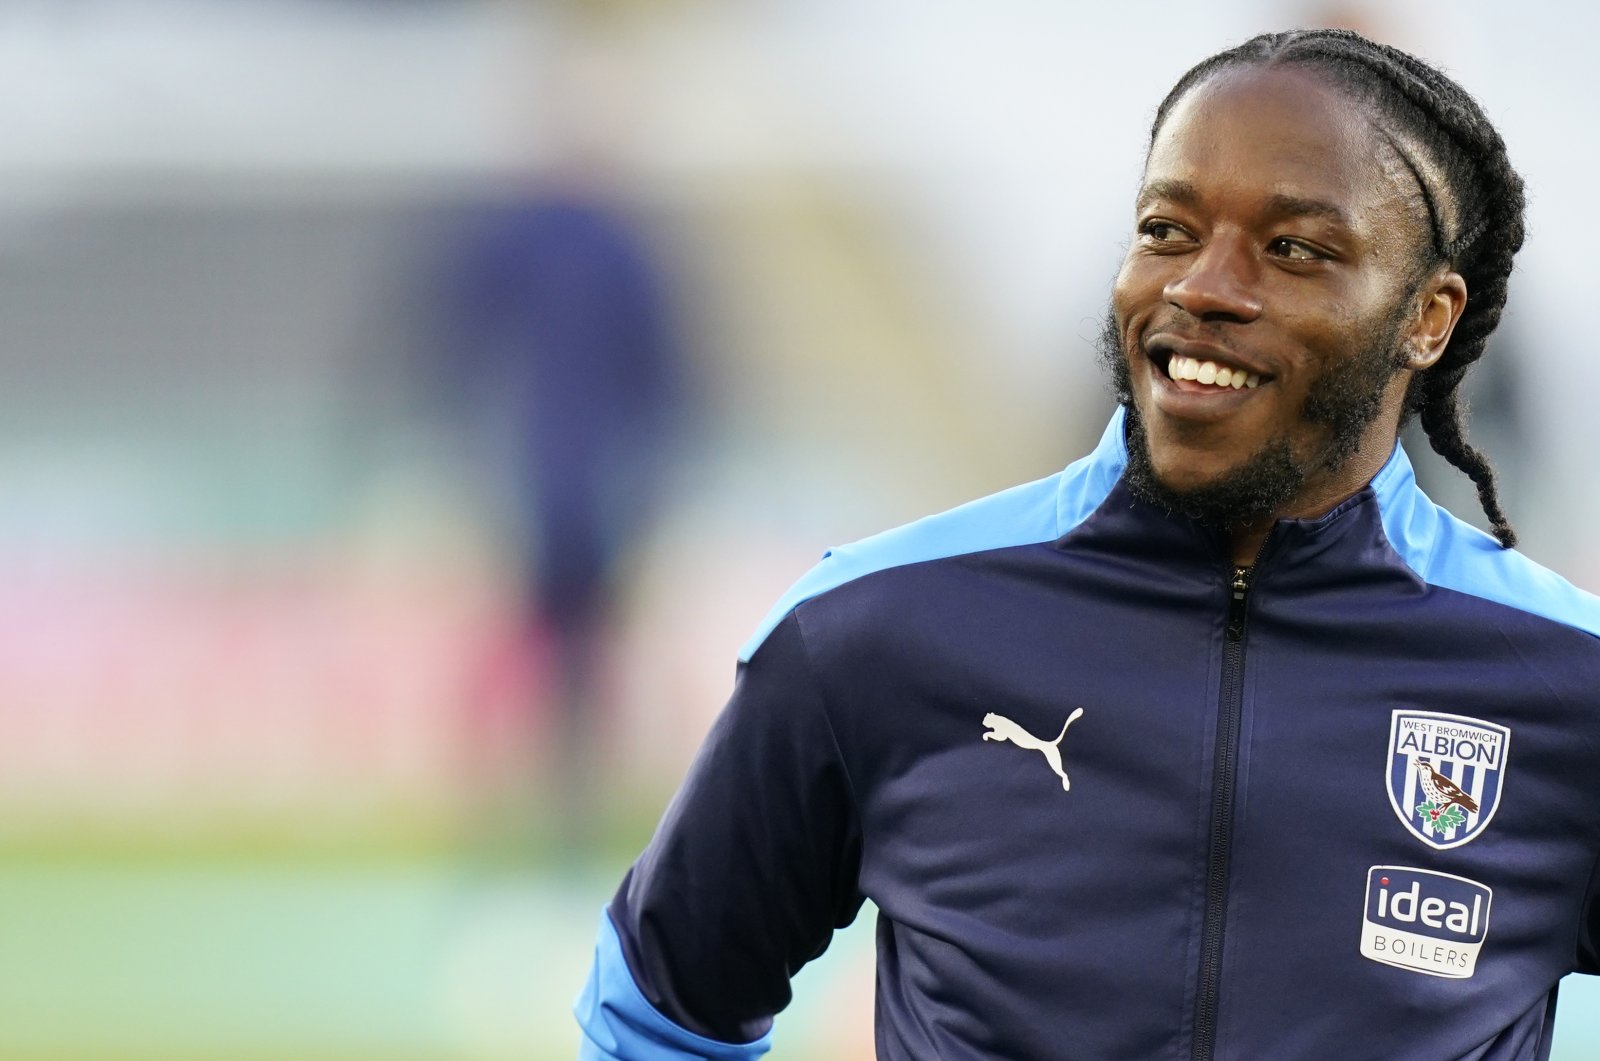 West Bromwich Albion's Romaine Sawyers smiles during warmup before a Premier League match against Leicester City, Leicester, England, April 22, 2021. (AP Photo)